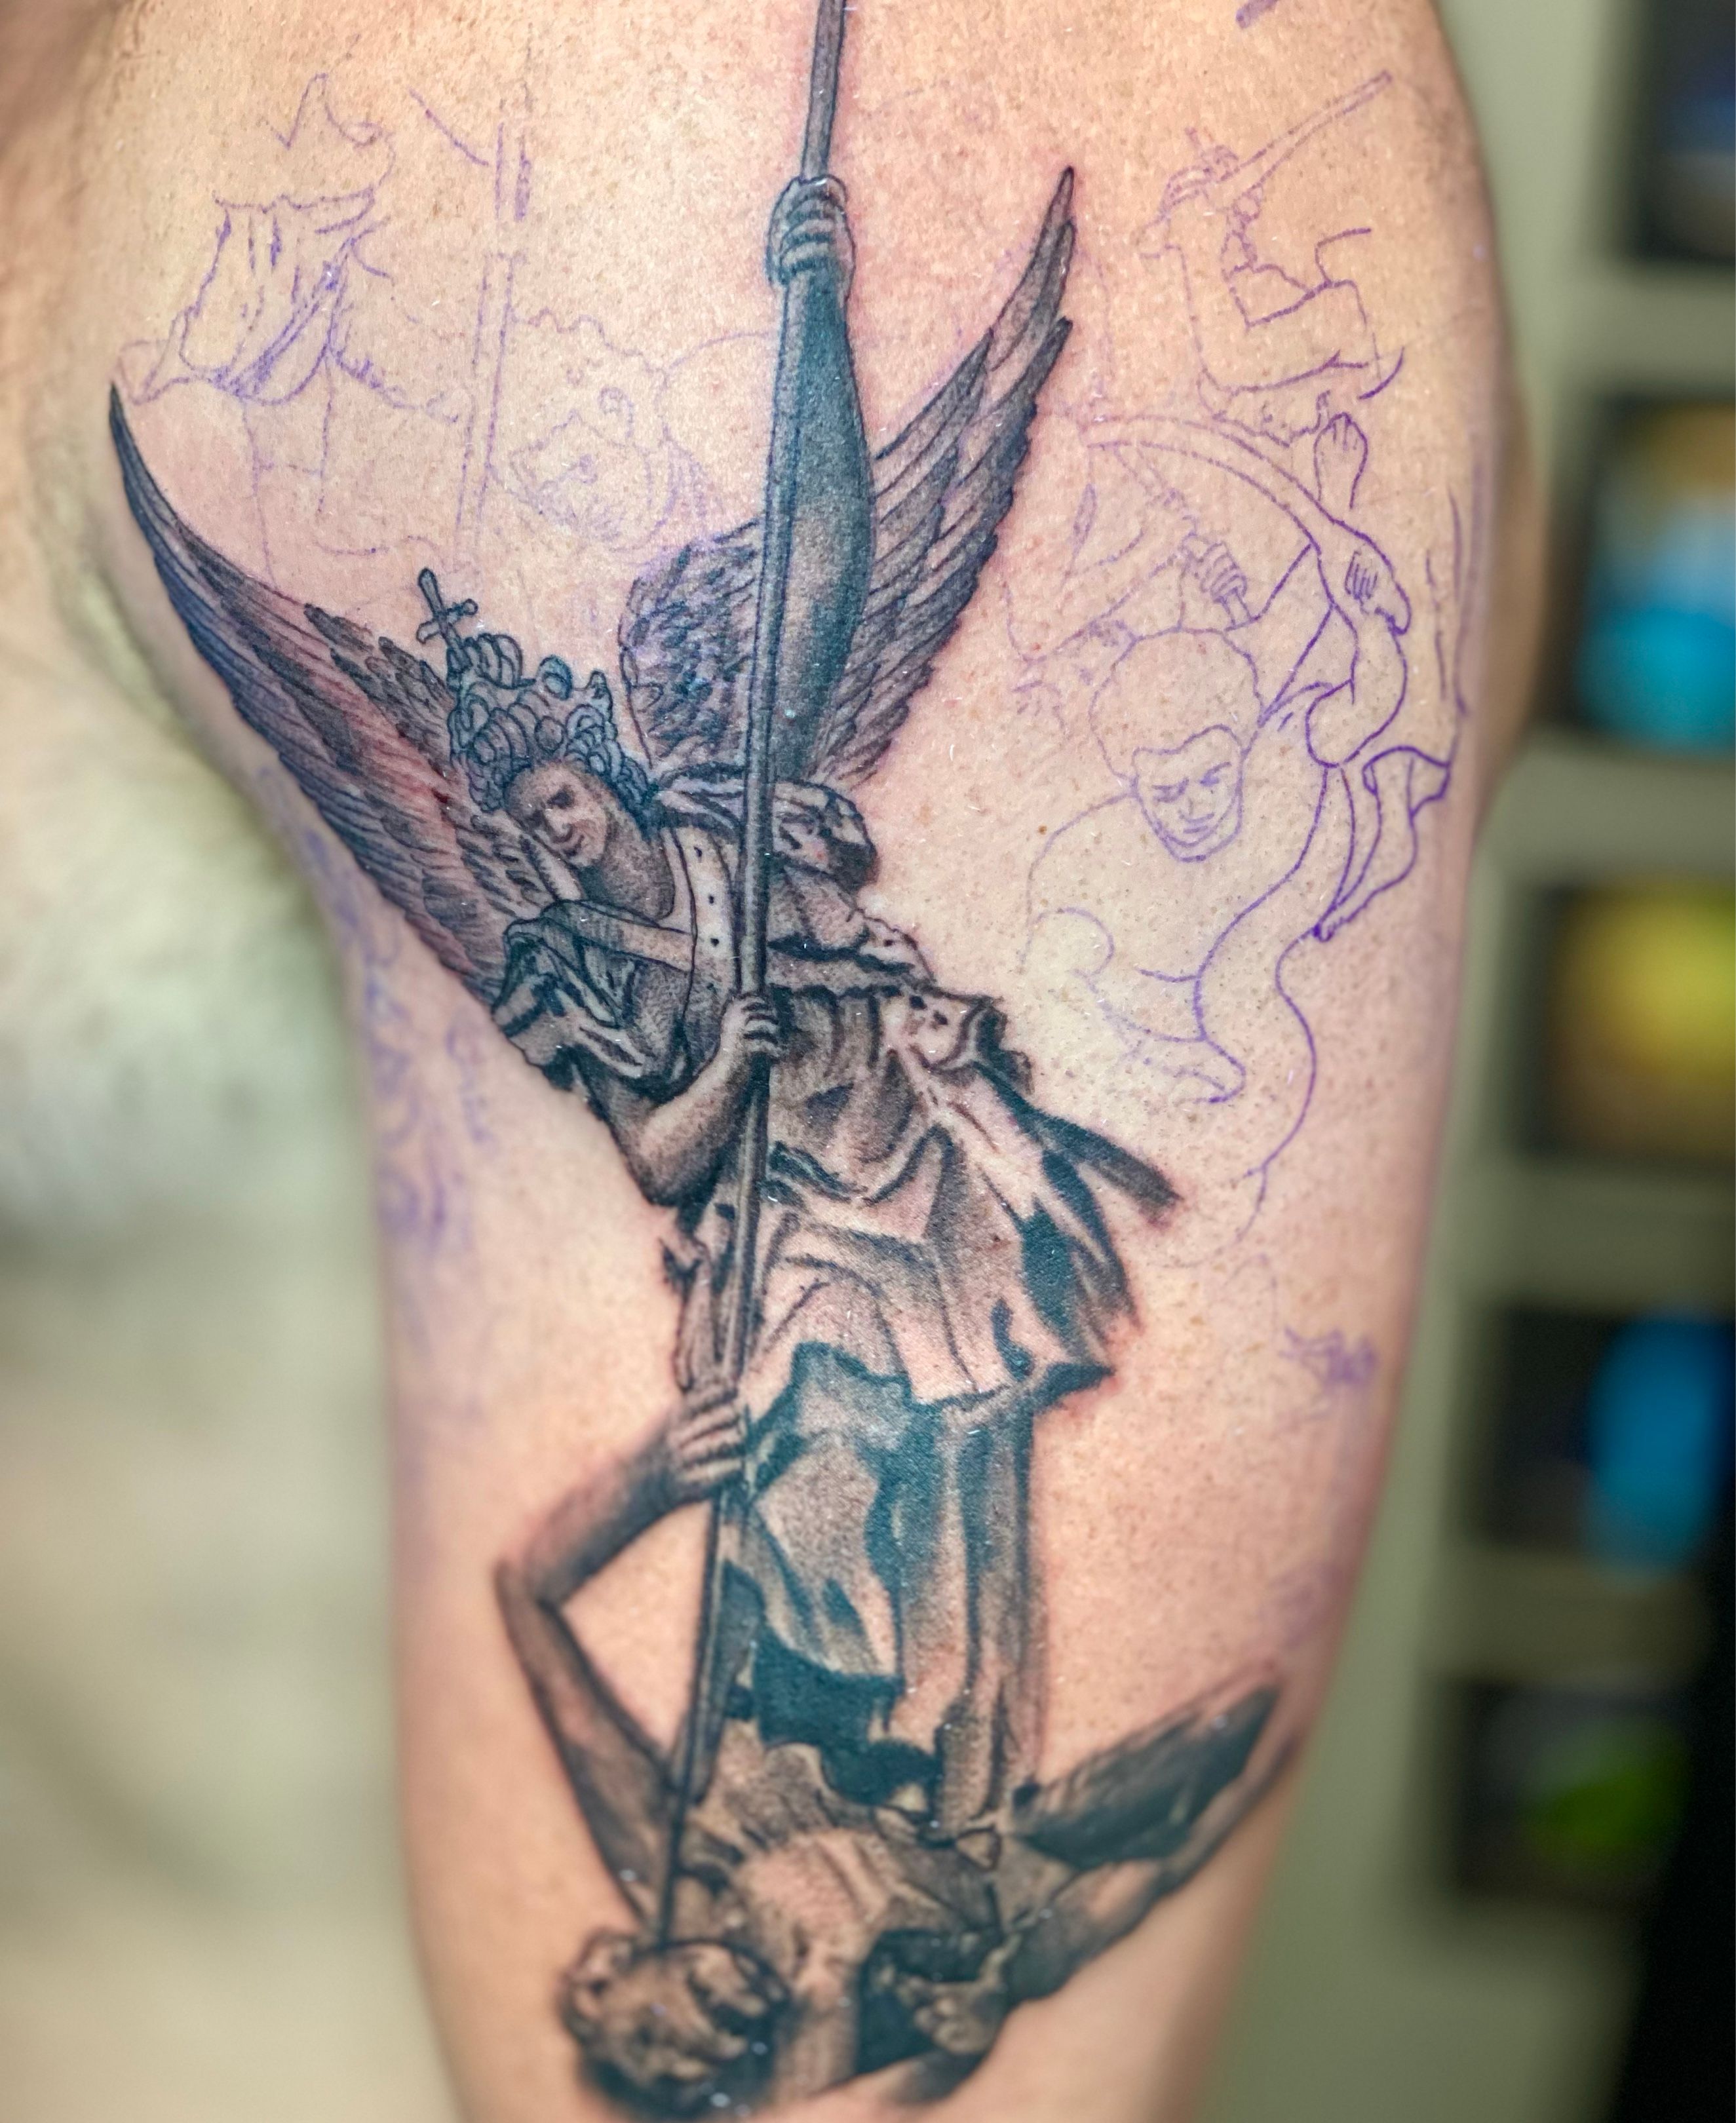 Independent Tattoo Company : Tattoos : Religious Angel : St Michael tattoo